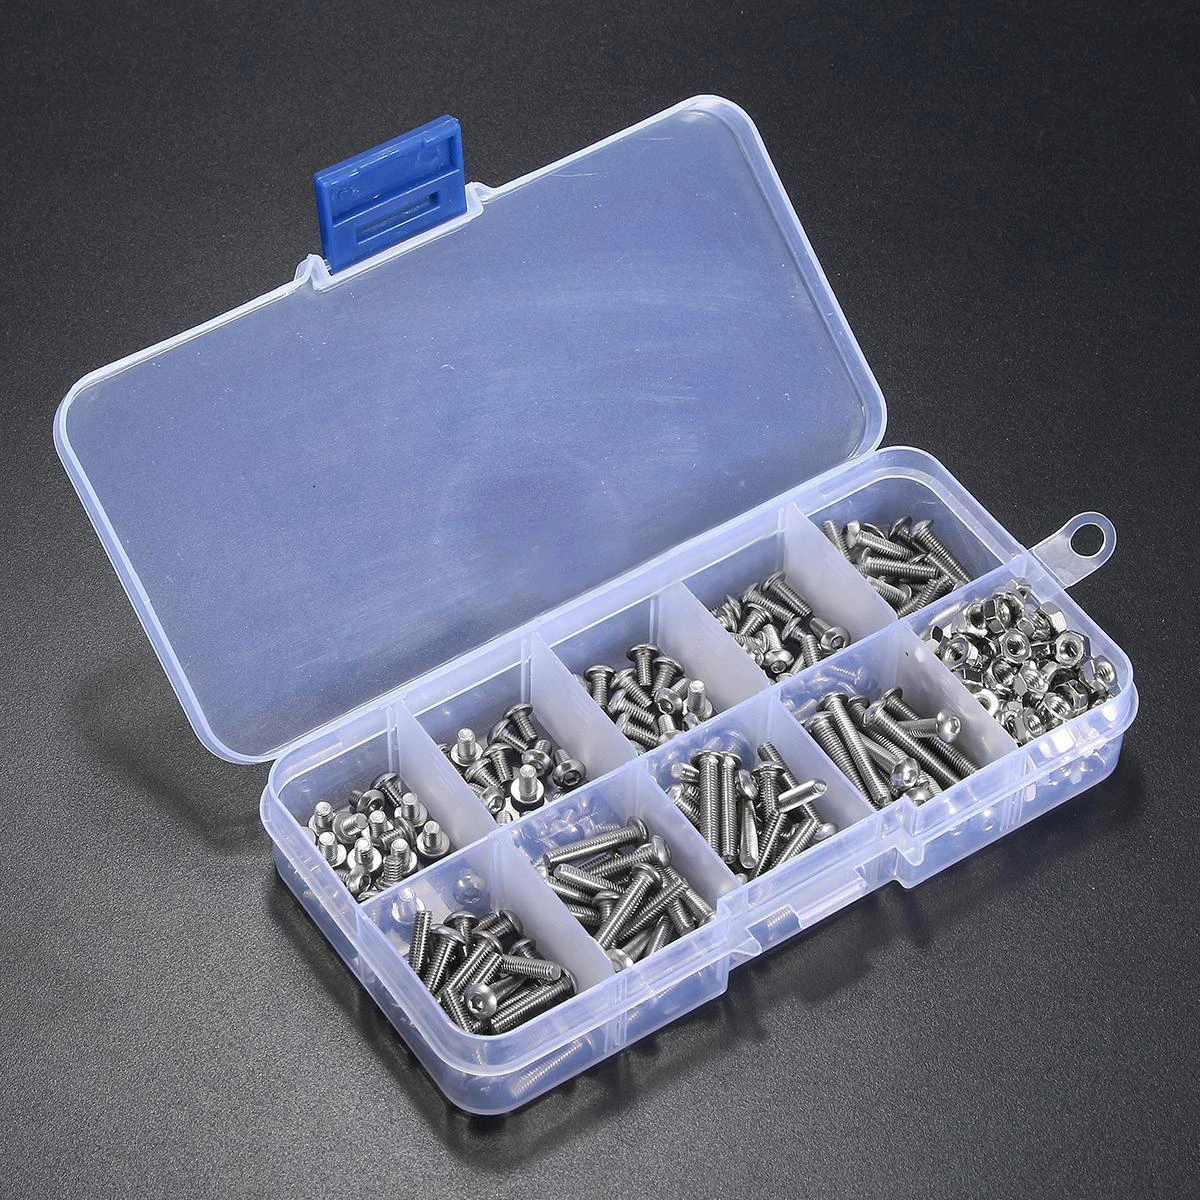 340pcs Assorted Stainless Steel M3 Screw 5/6/8/10/12/14/16/18/20mm with Hex Nuts Bolt Cap Socket Set